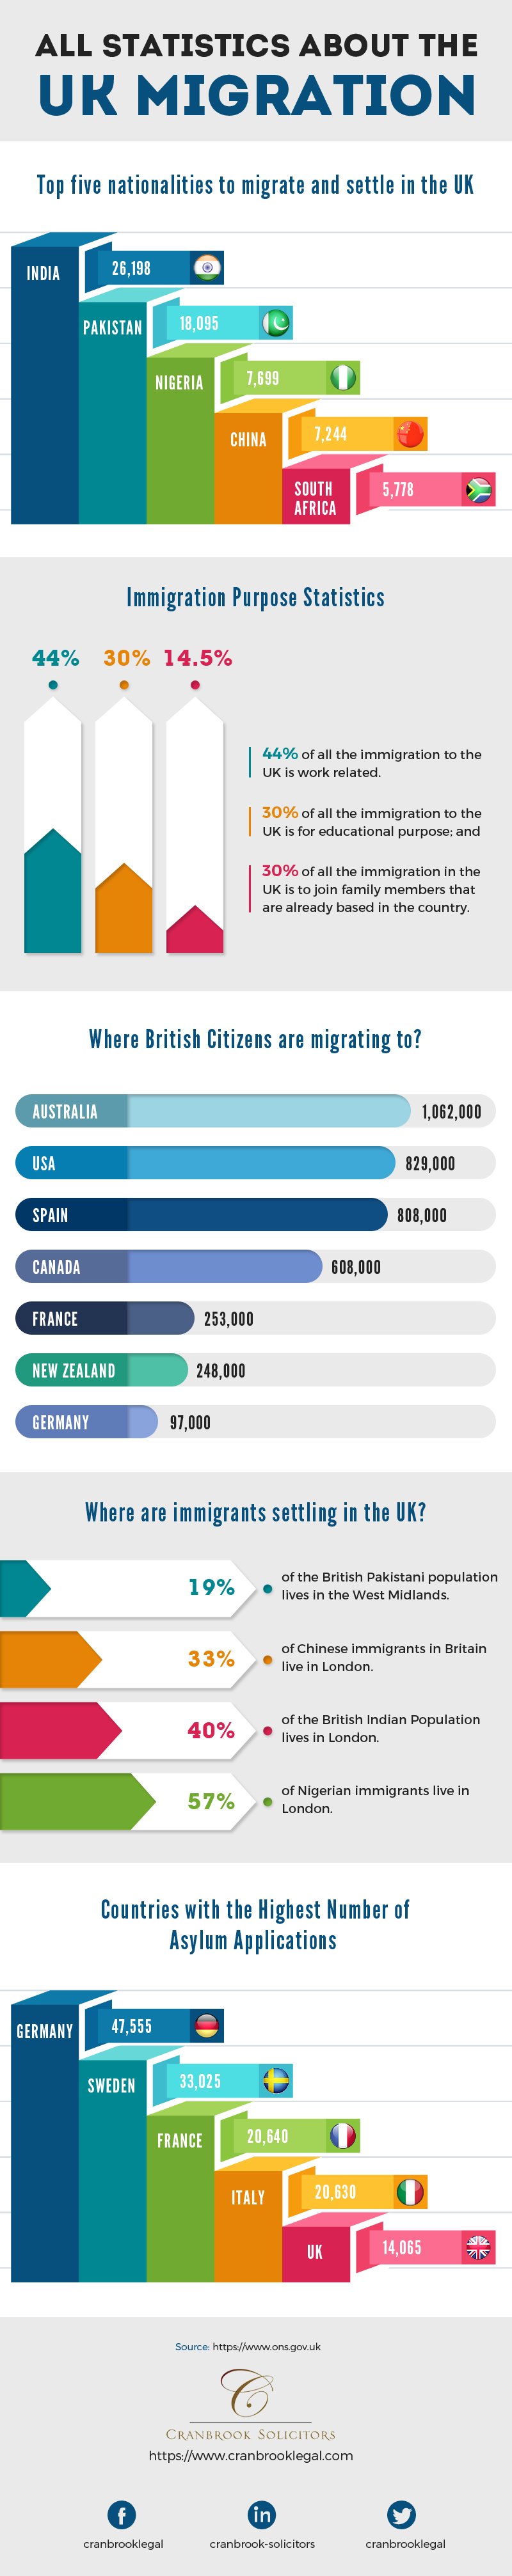 Statistics About The UK Migration